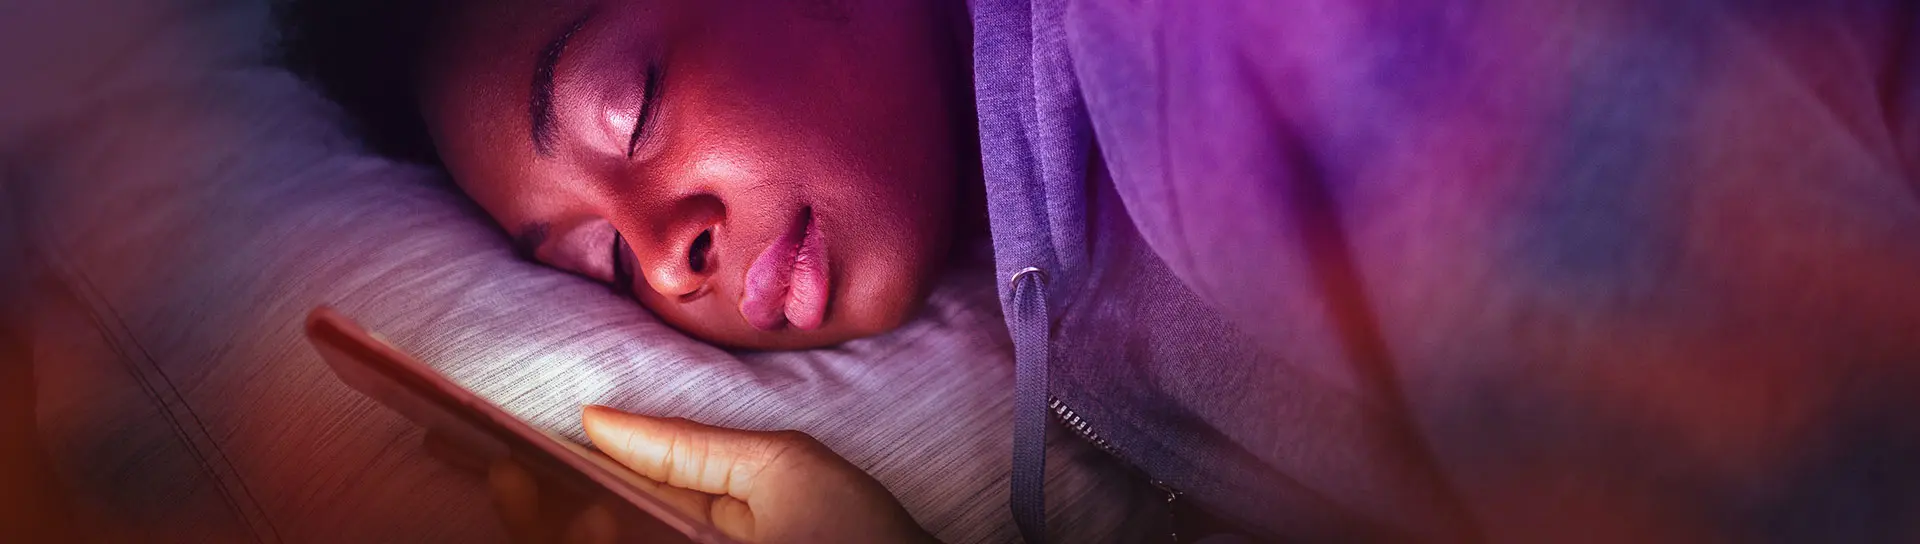 Close up portrait of African American woman holding mobile phone and sleeping.